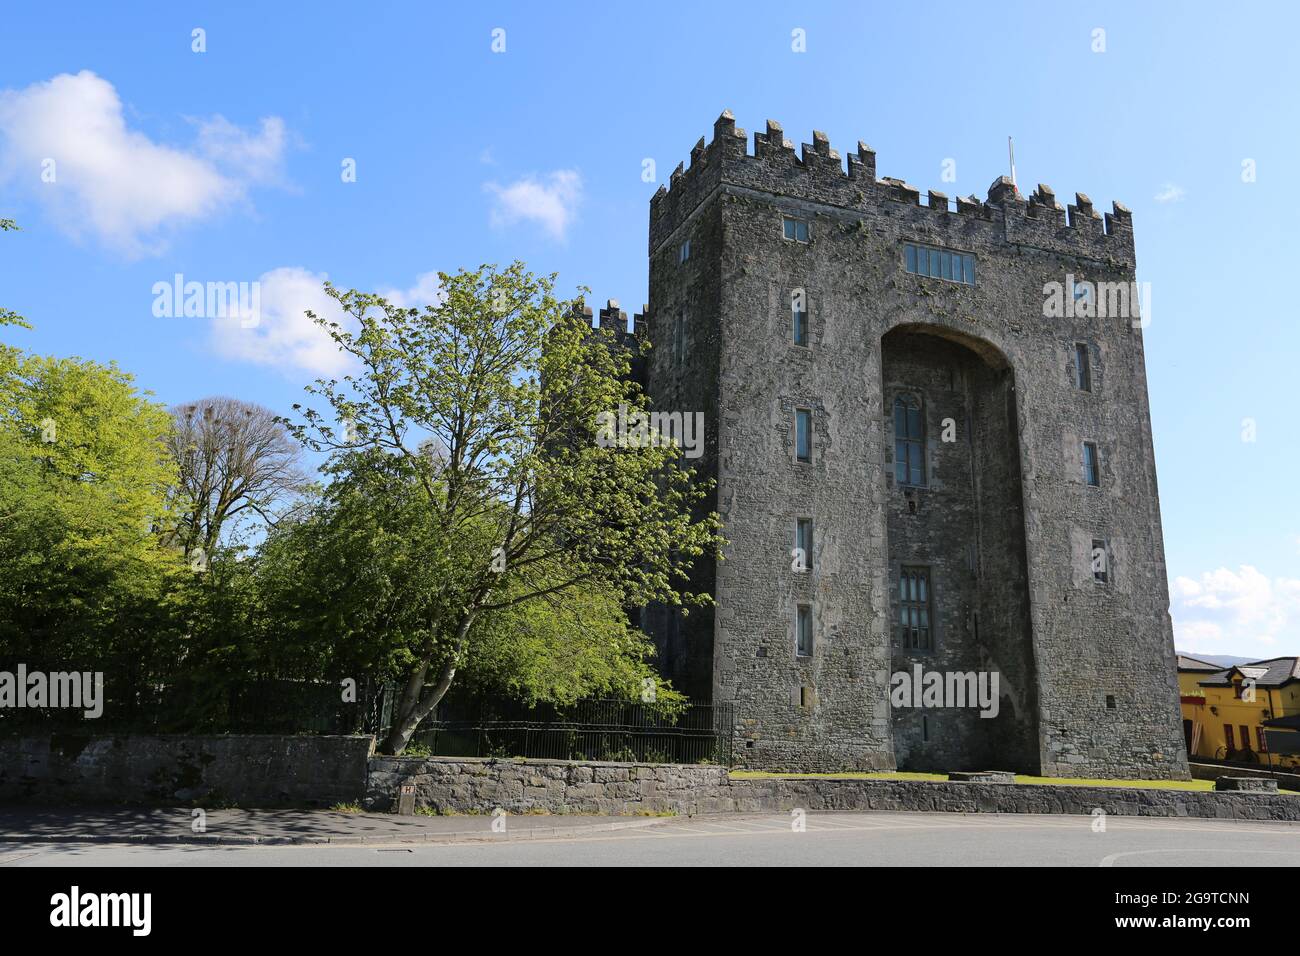 Beautiful shot of the Bunratty Castle in Bunratty, Ireland, surrounded by trees Stock Photo